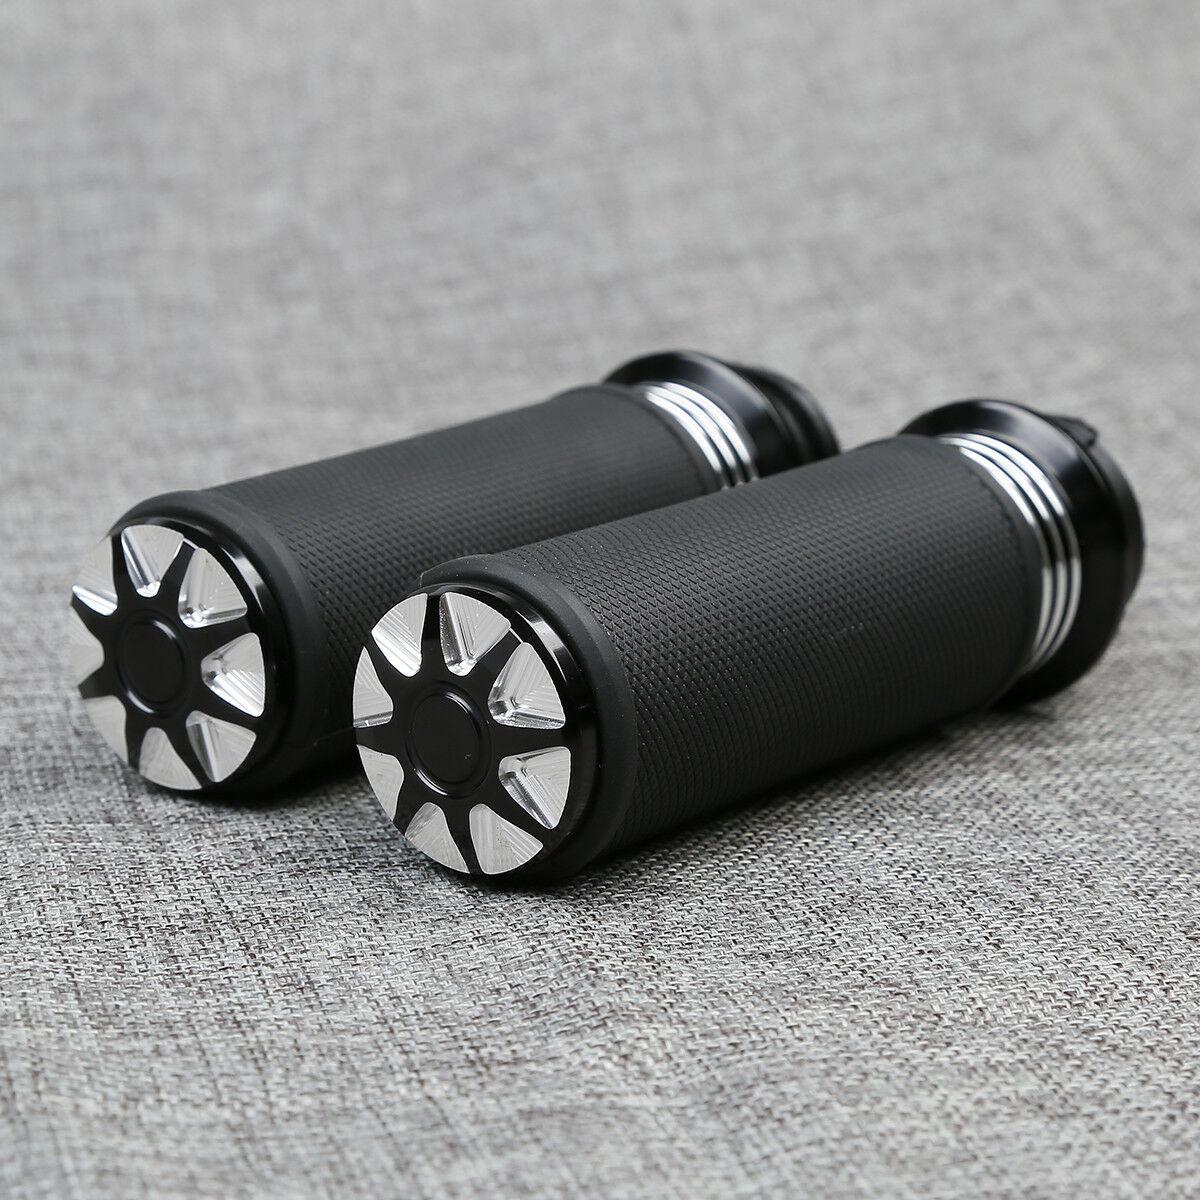 New Black 1'' CNC Handlebar Hand Grips For Harley Sportster XL 883 1200 96-Later - Moto Life Products